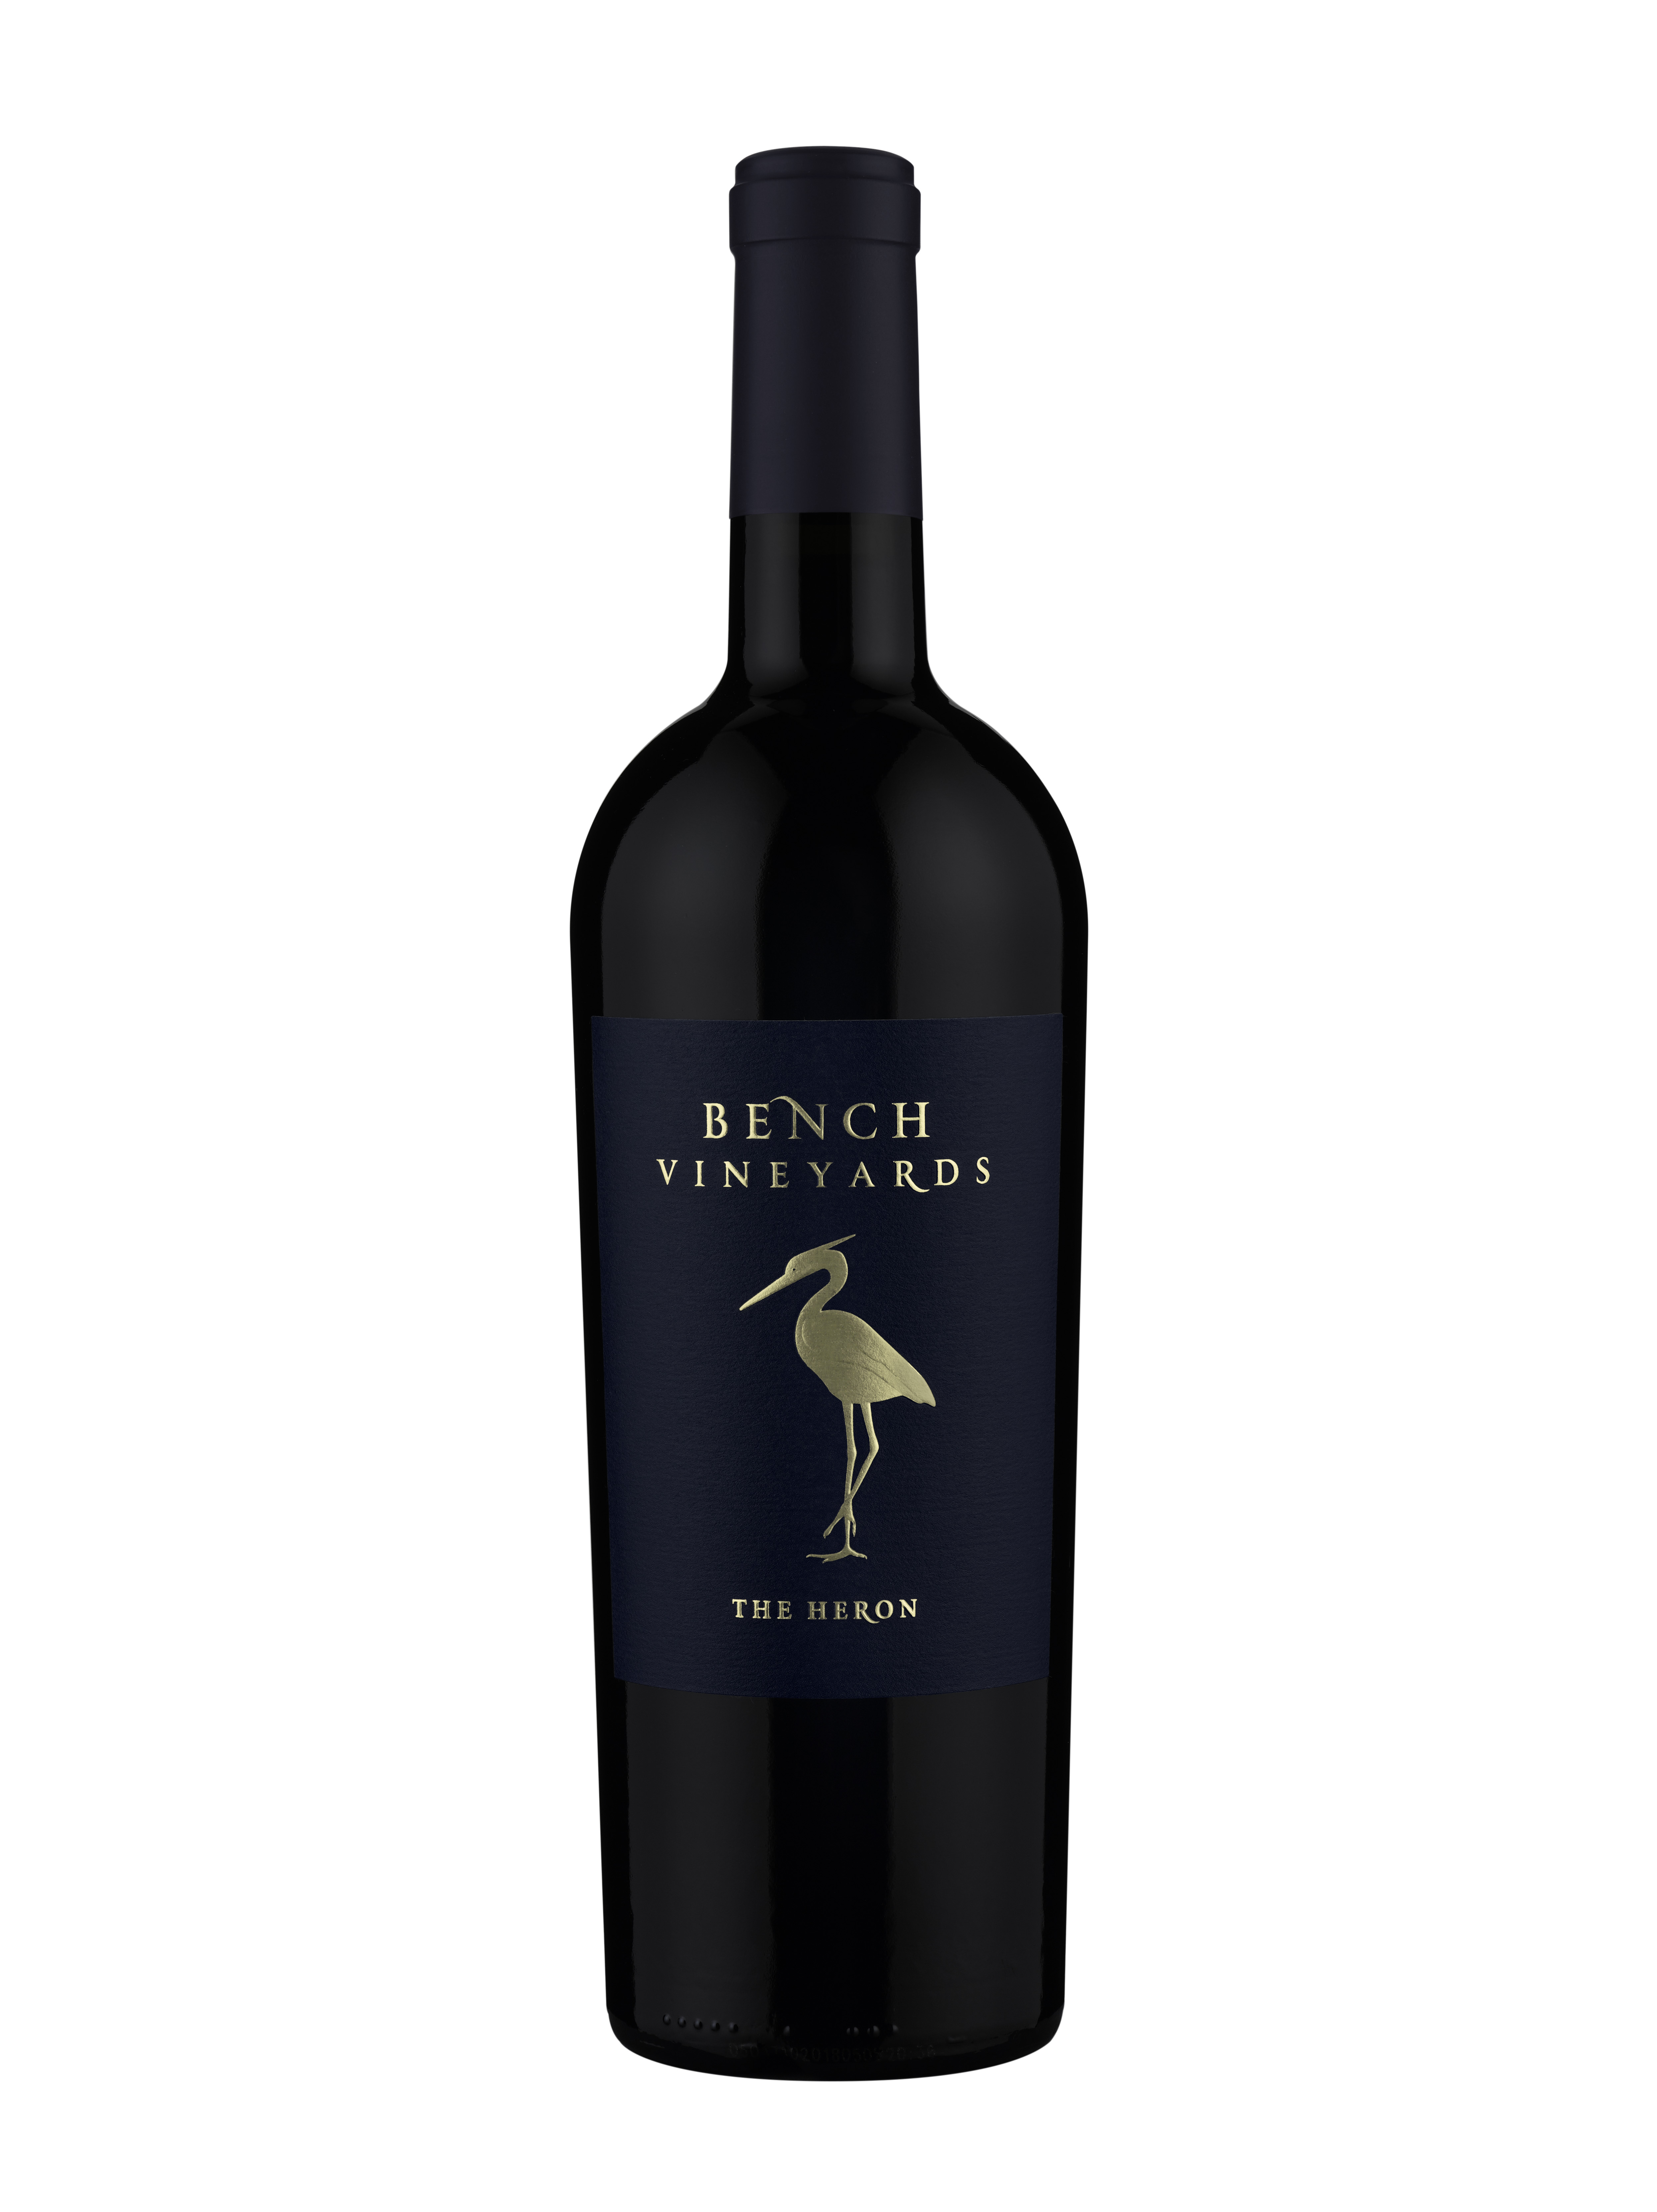 Product Image for 2019 Bench Vineyards "The Heron" Cabernet Sauvignon, SLD